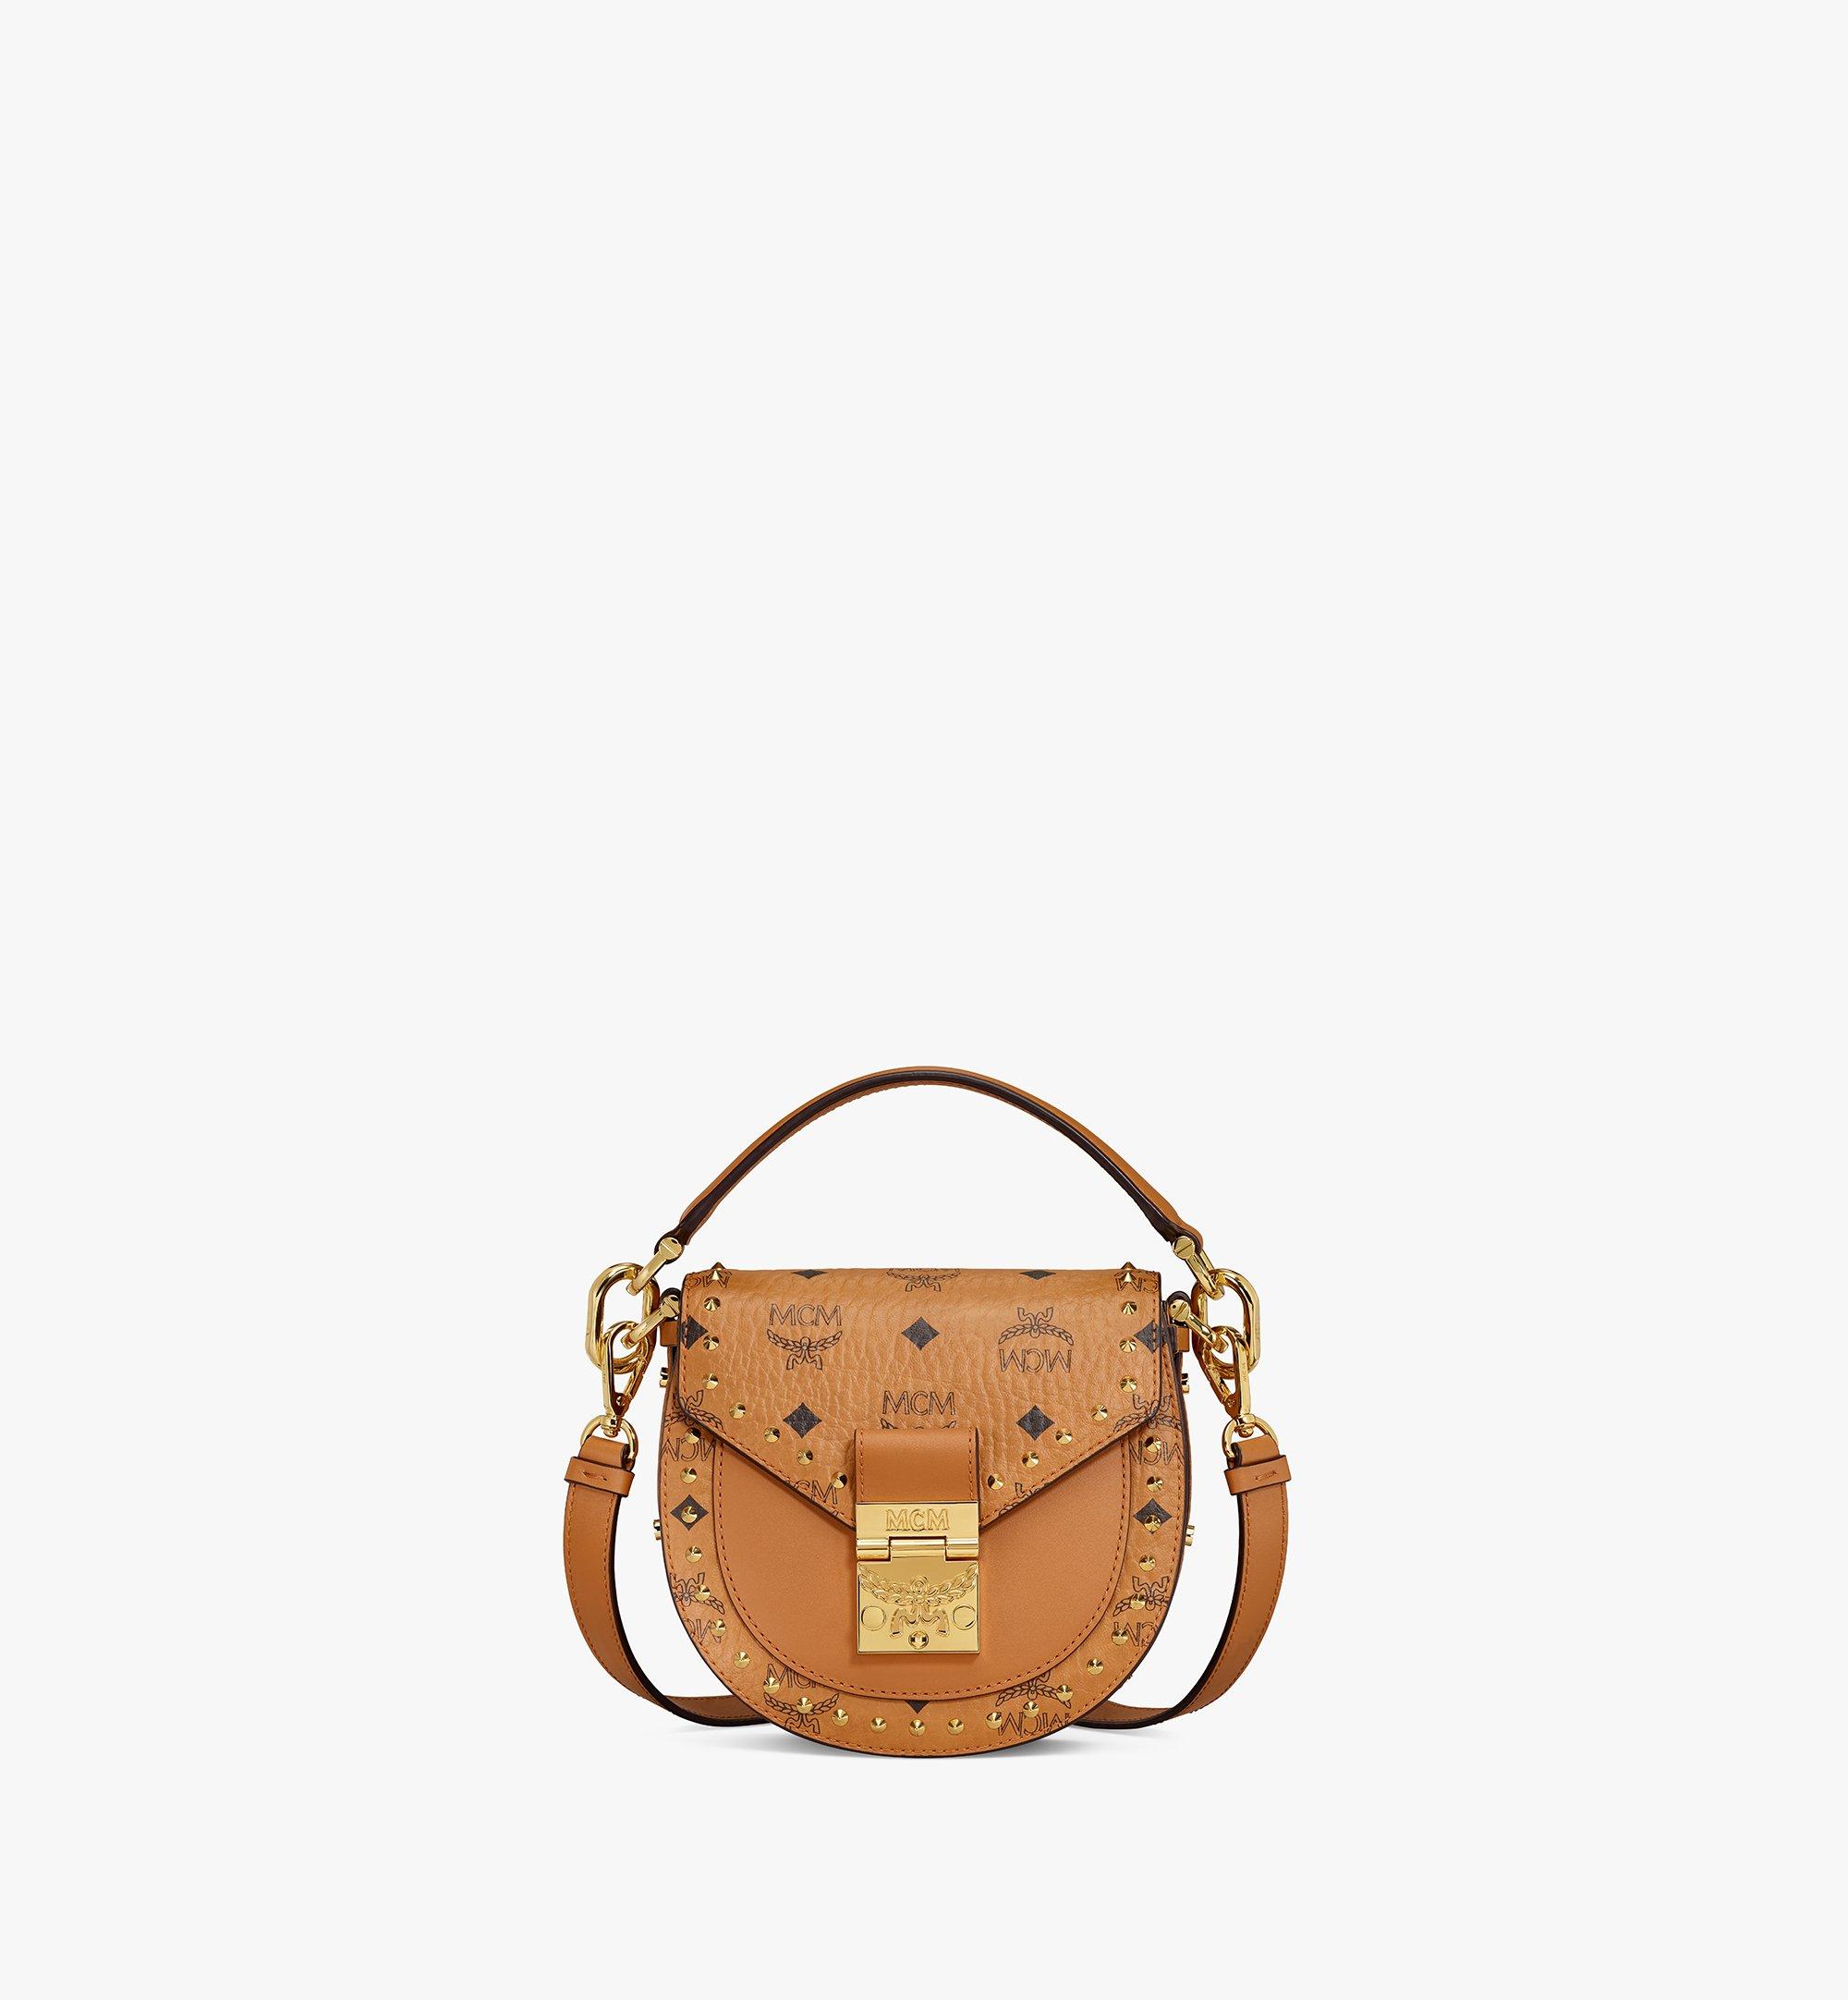 MCM Tracy Shoulder Bag in Studded Outline Visetos Cognac MWSAAPA04CO001 Alternate View 1